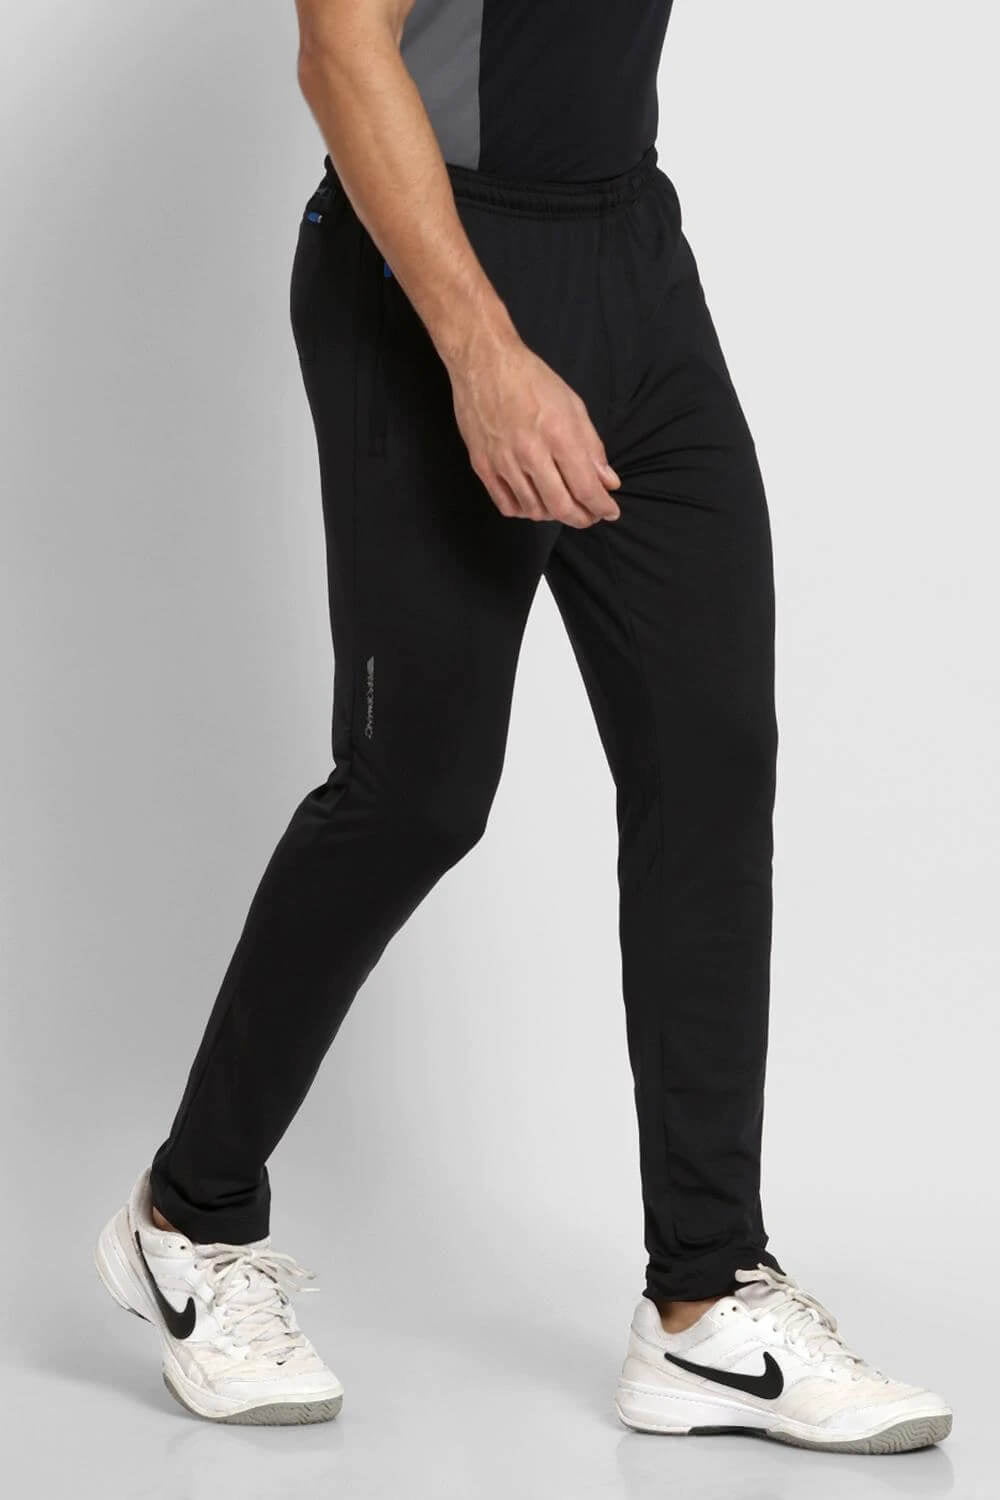 New Style Designer Yoga Tracksuit For Women Fitness Align Pant Seamless Gym  Leggings And Workout Set With Active Shirt For Active Ladies From  Bianvincentyg, $21.16 | DHgate.Com